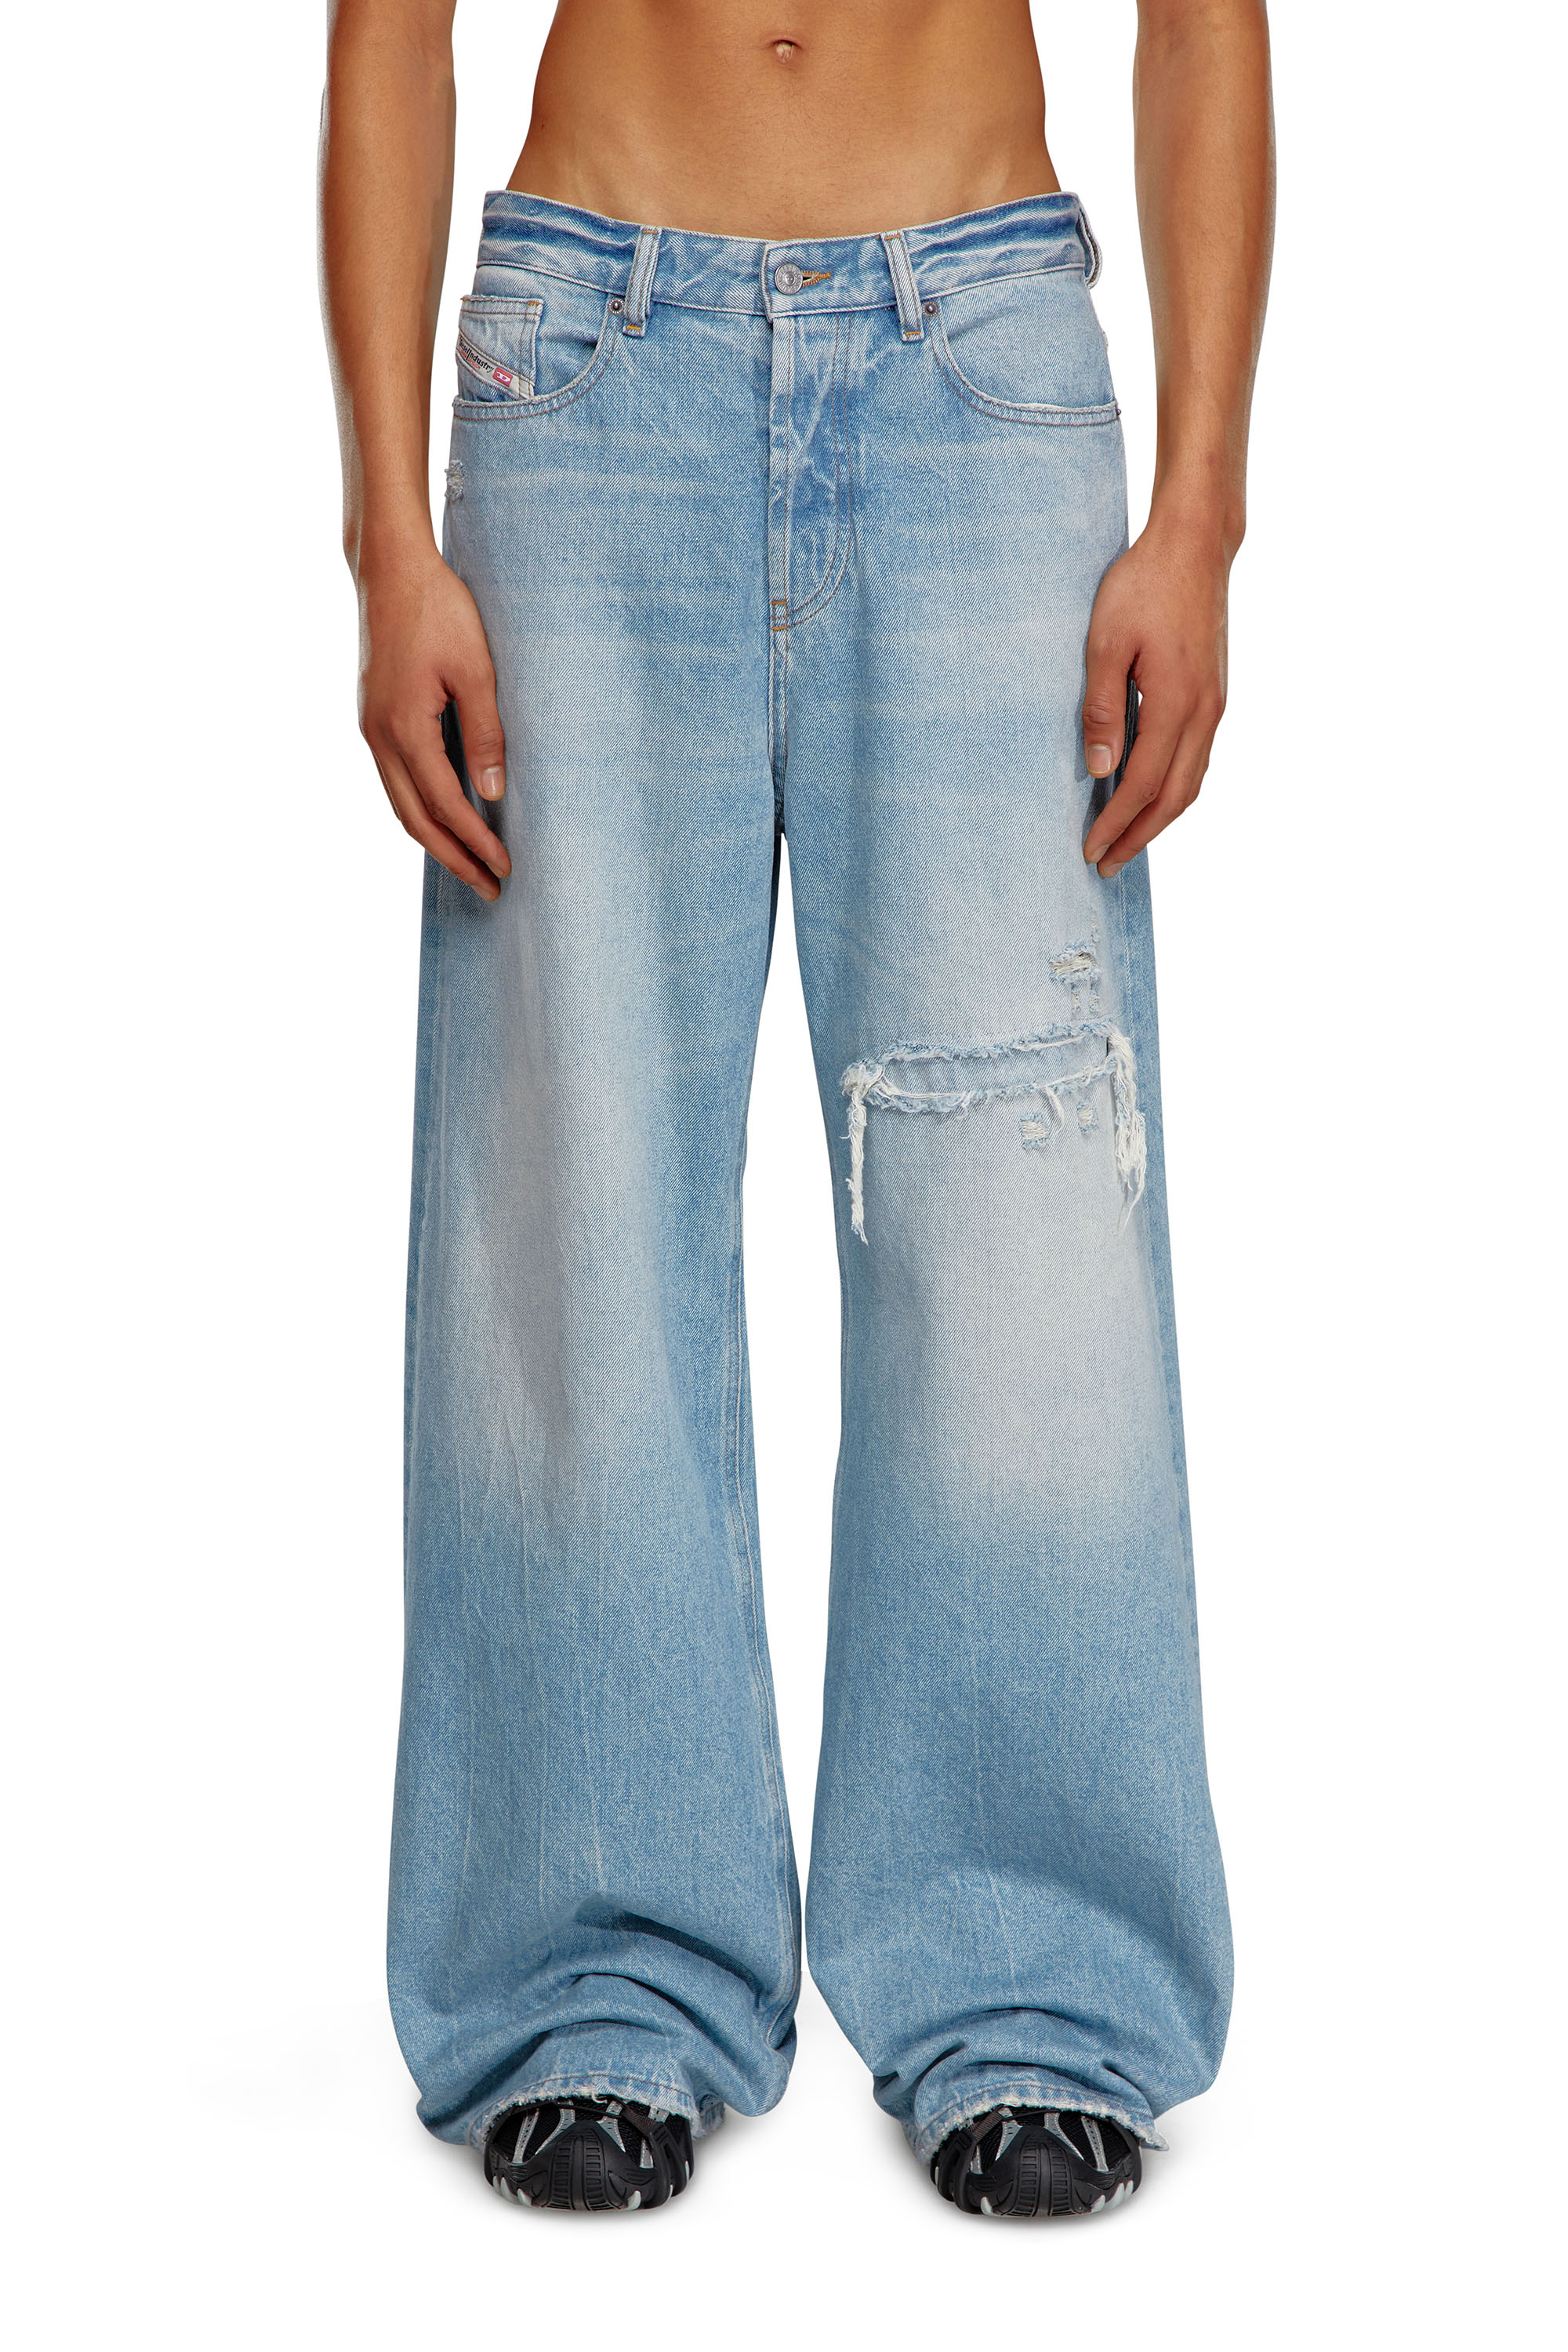 Diesel - Straight Jeans 1996 D-Sire 09E25, Mujer Straight Jeans - 1996 D-Sire in Azul marino - Image 5